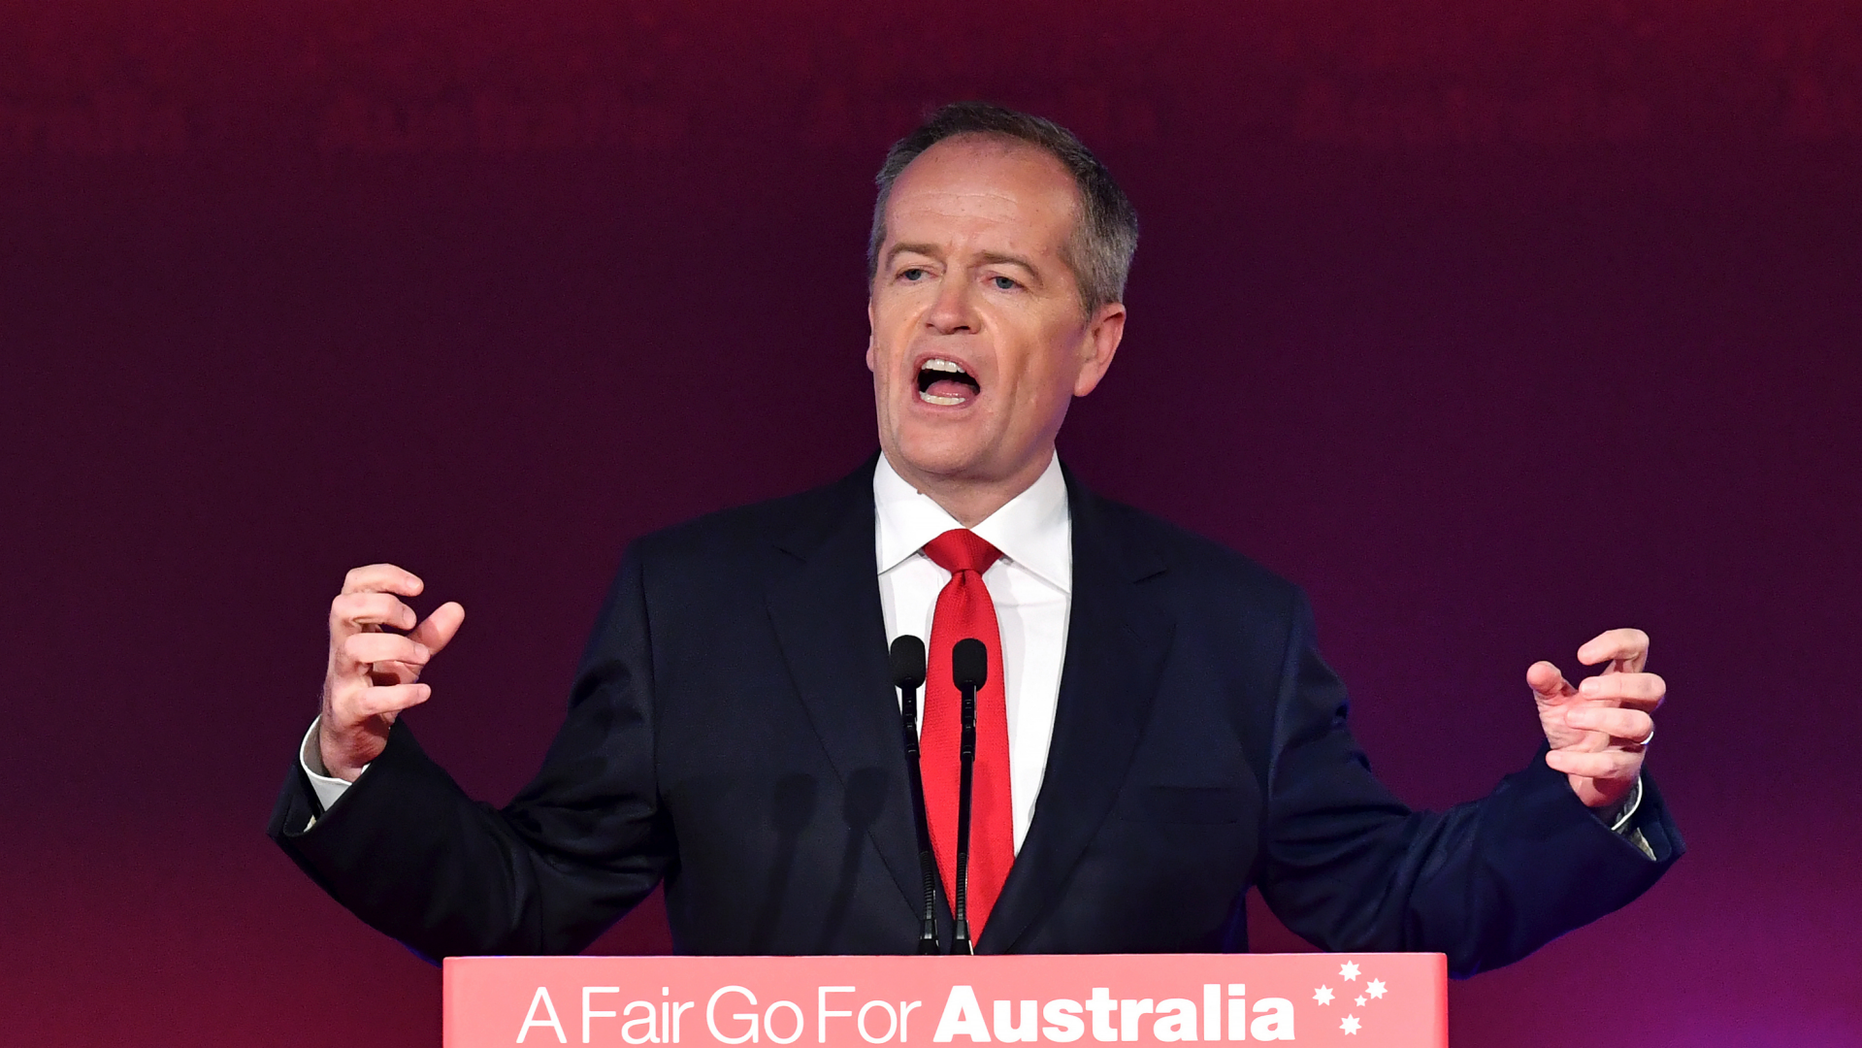 Opposition leader Bill Shorten speaks at the launch of Labor's federal election campaign at the Brisbane Convention and Exhibition Centre in Brisbane, Sunday, May 5, 2019. Australia's opposition party officially launched its election campaign putting health care and climate change at the forefront of its bid for election on May 18. (Darren England/AAP Image via AP)